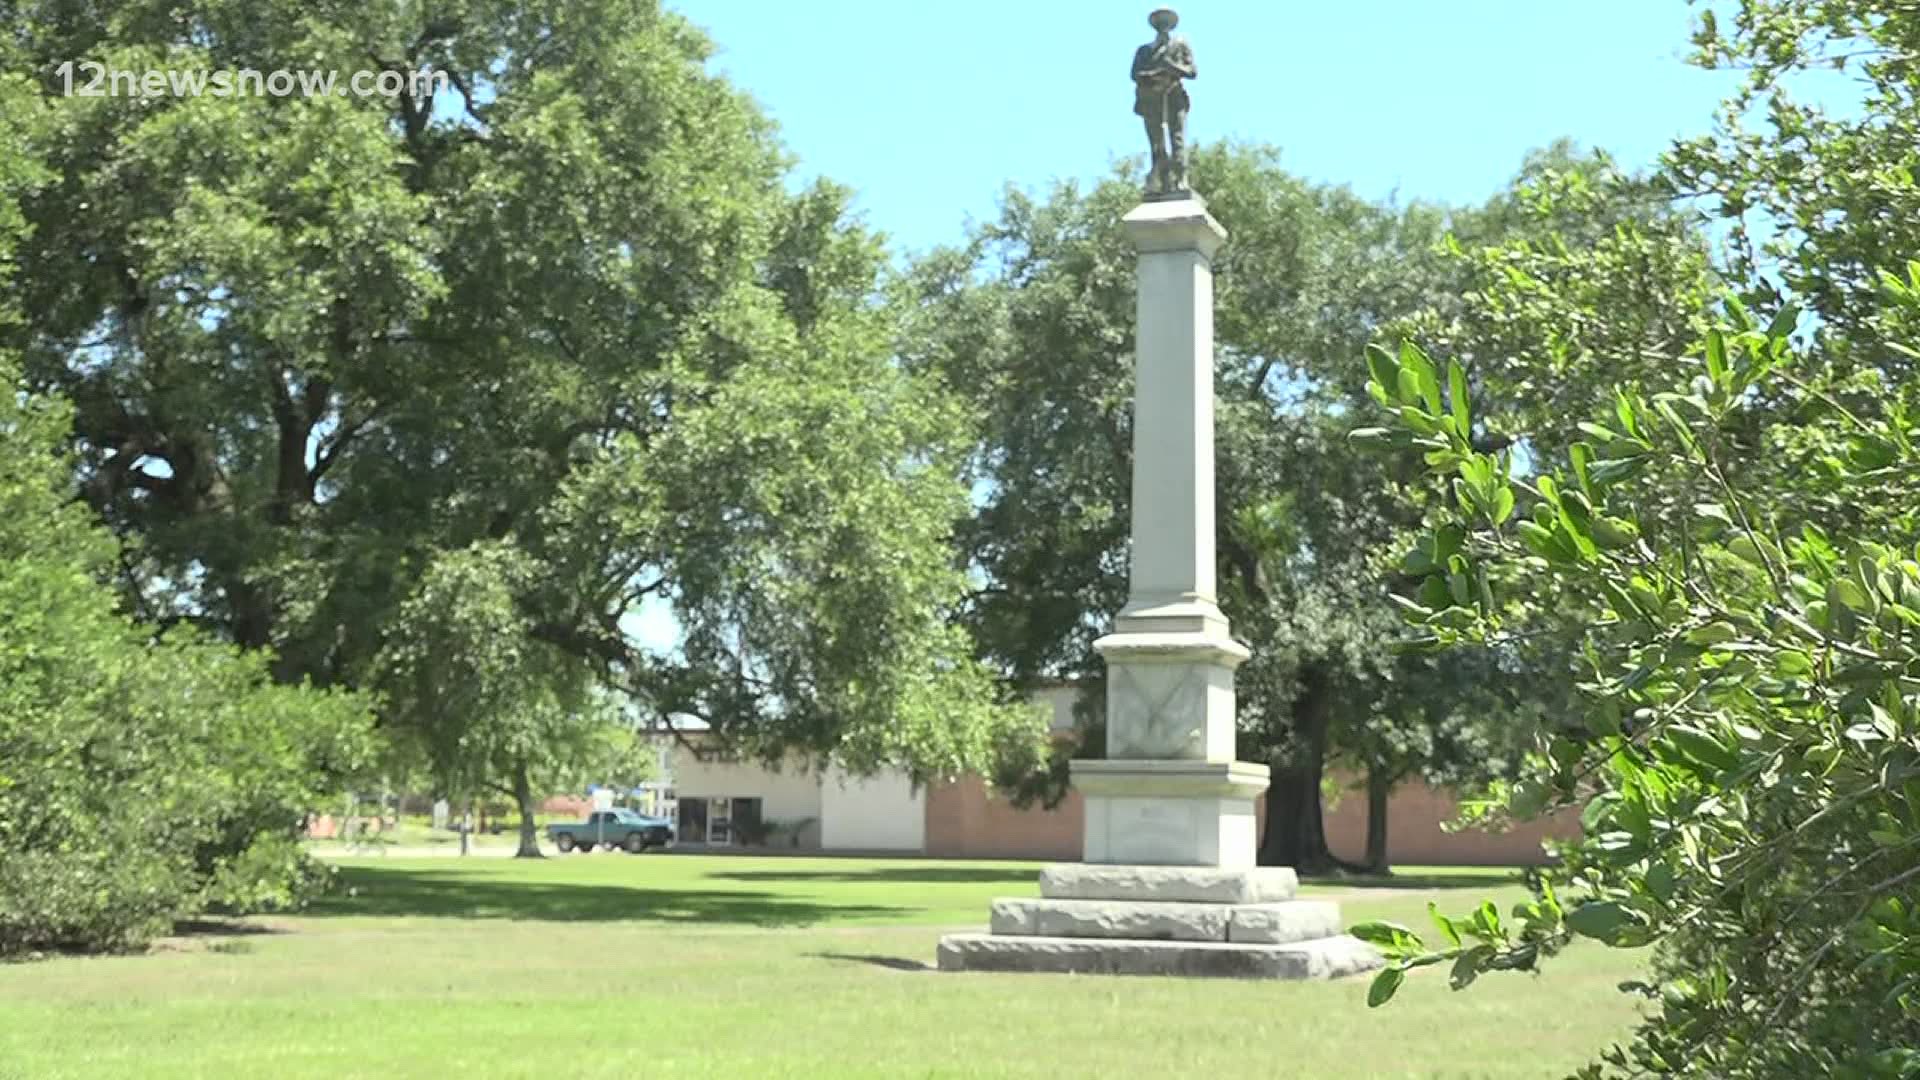 The statue was removed from Wiess Park.